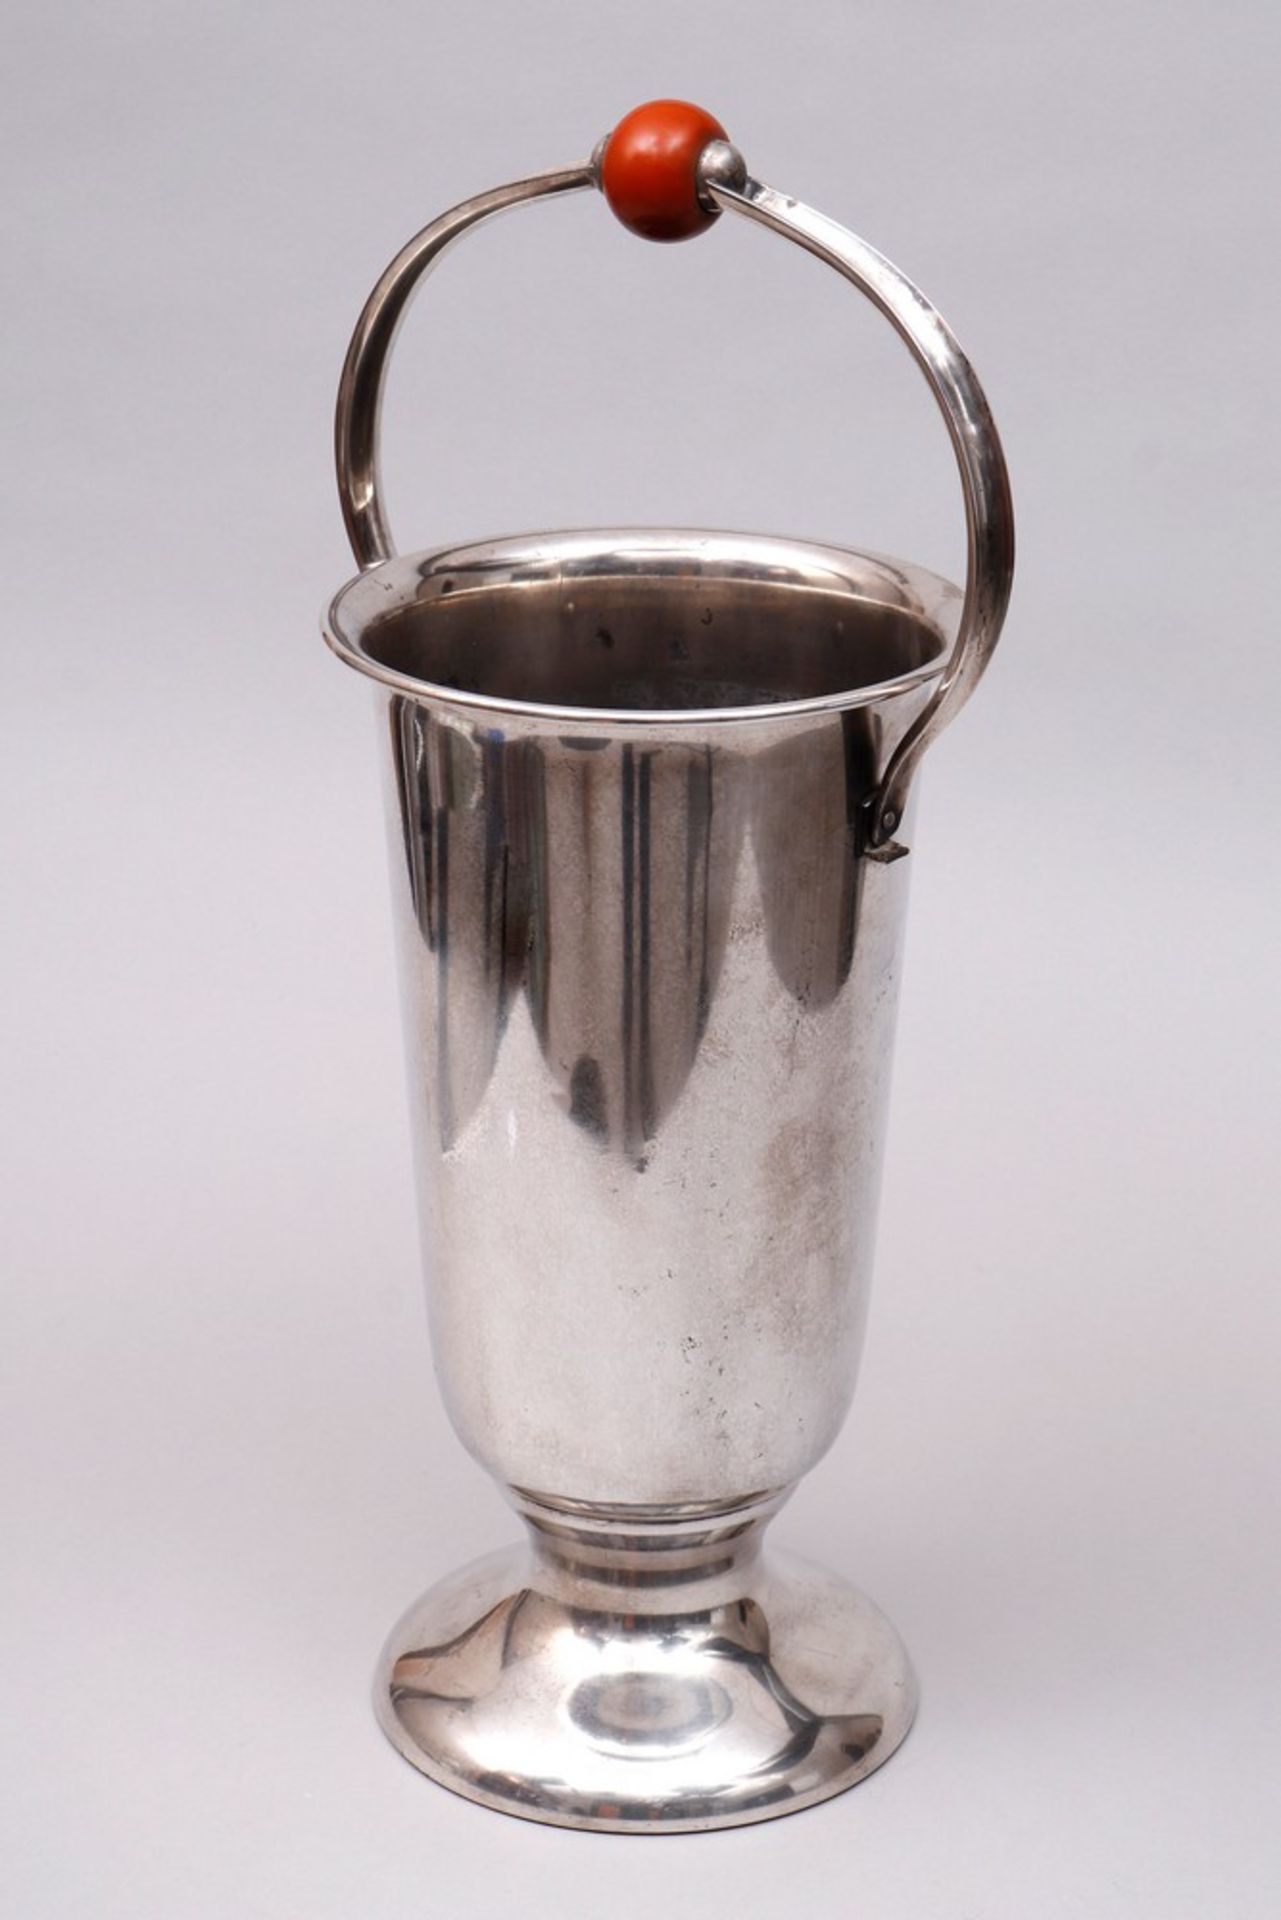 Large Art Deco champagne cooler, silver plated, WMF, 1930s - Image 2 of 4